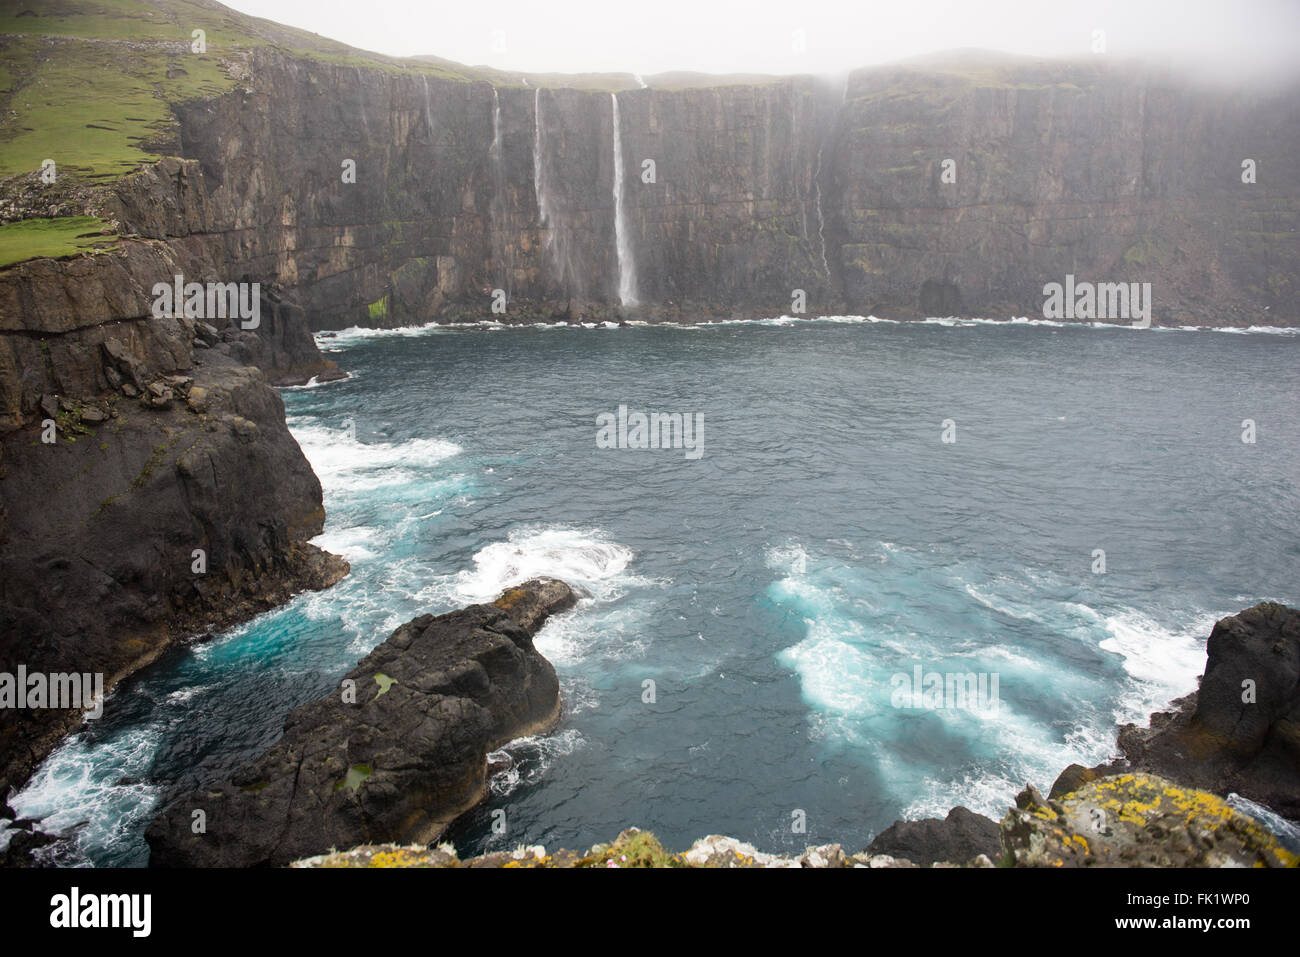 Typical landscape on the Faroe Islands, with cliffs and water fall Stock Photo